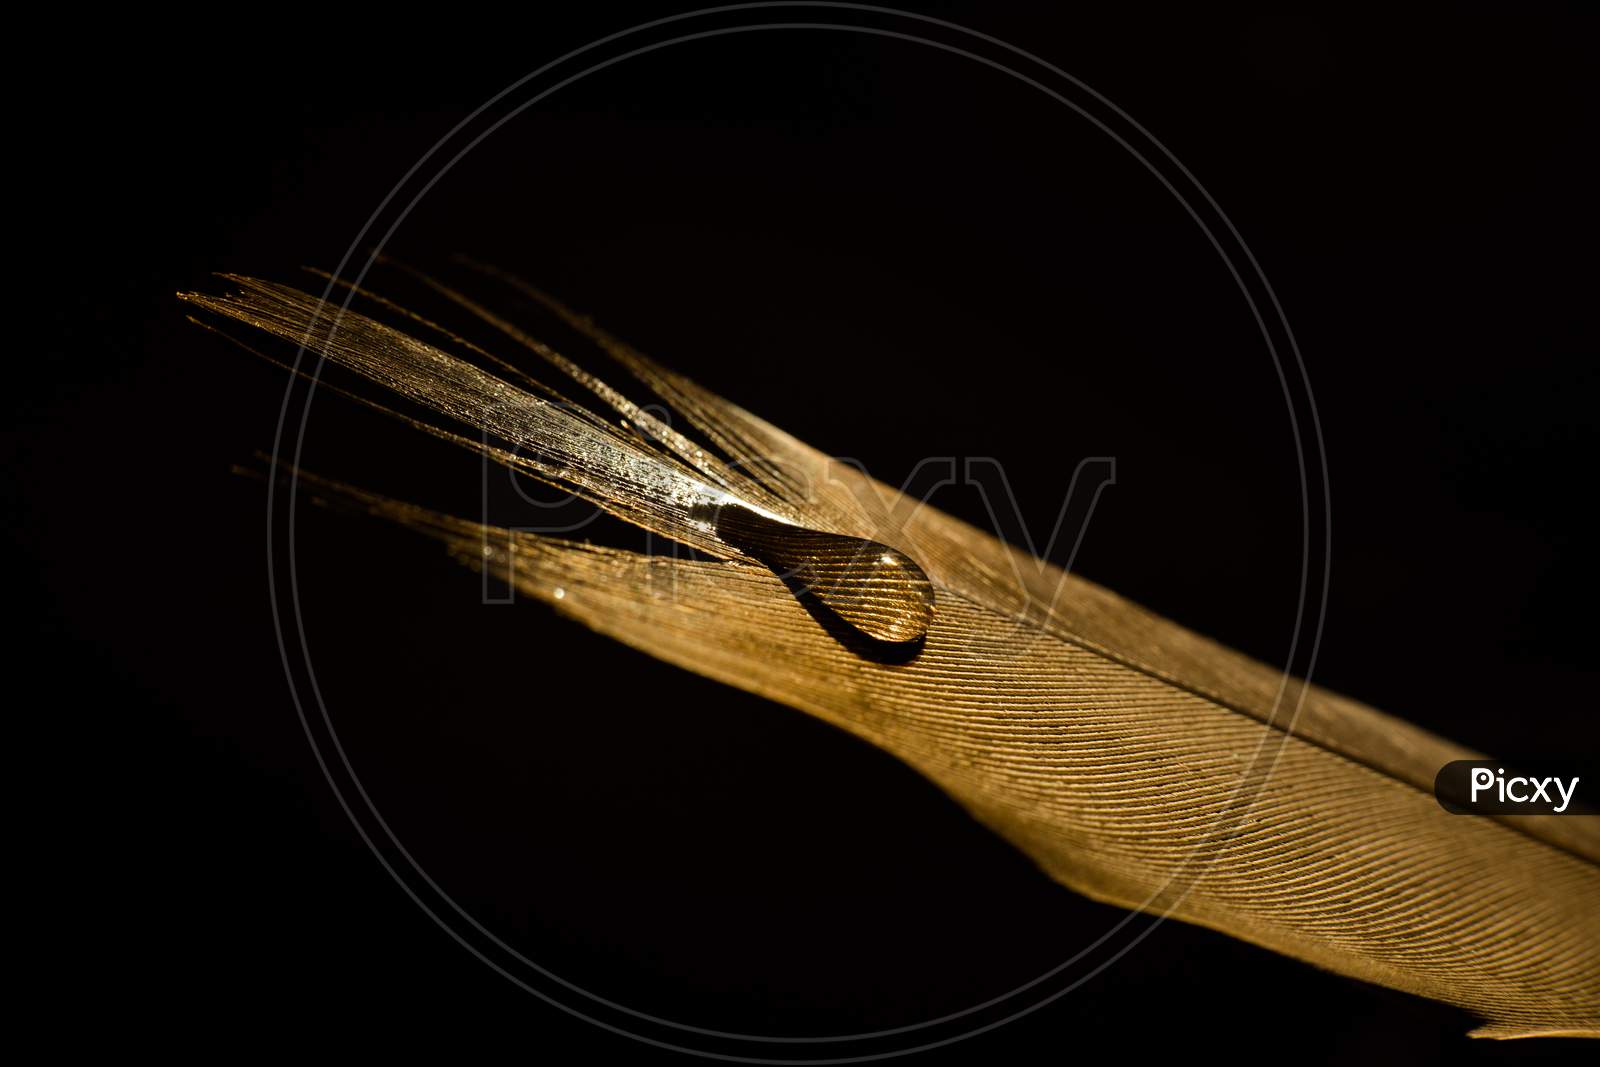 Feather On A Black Background With Water Droplets. Golden Feather Close Up.